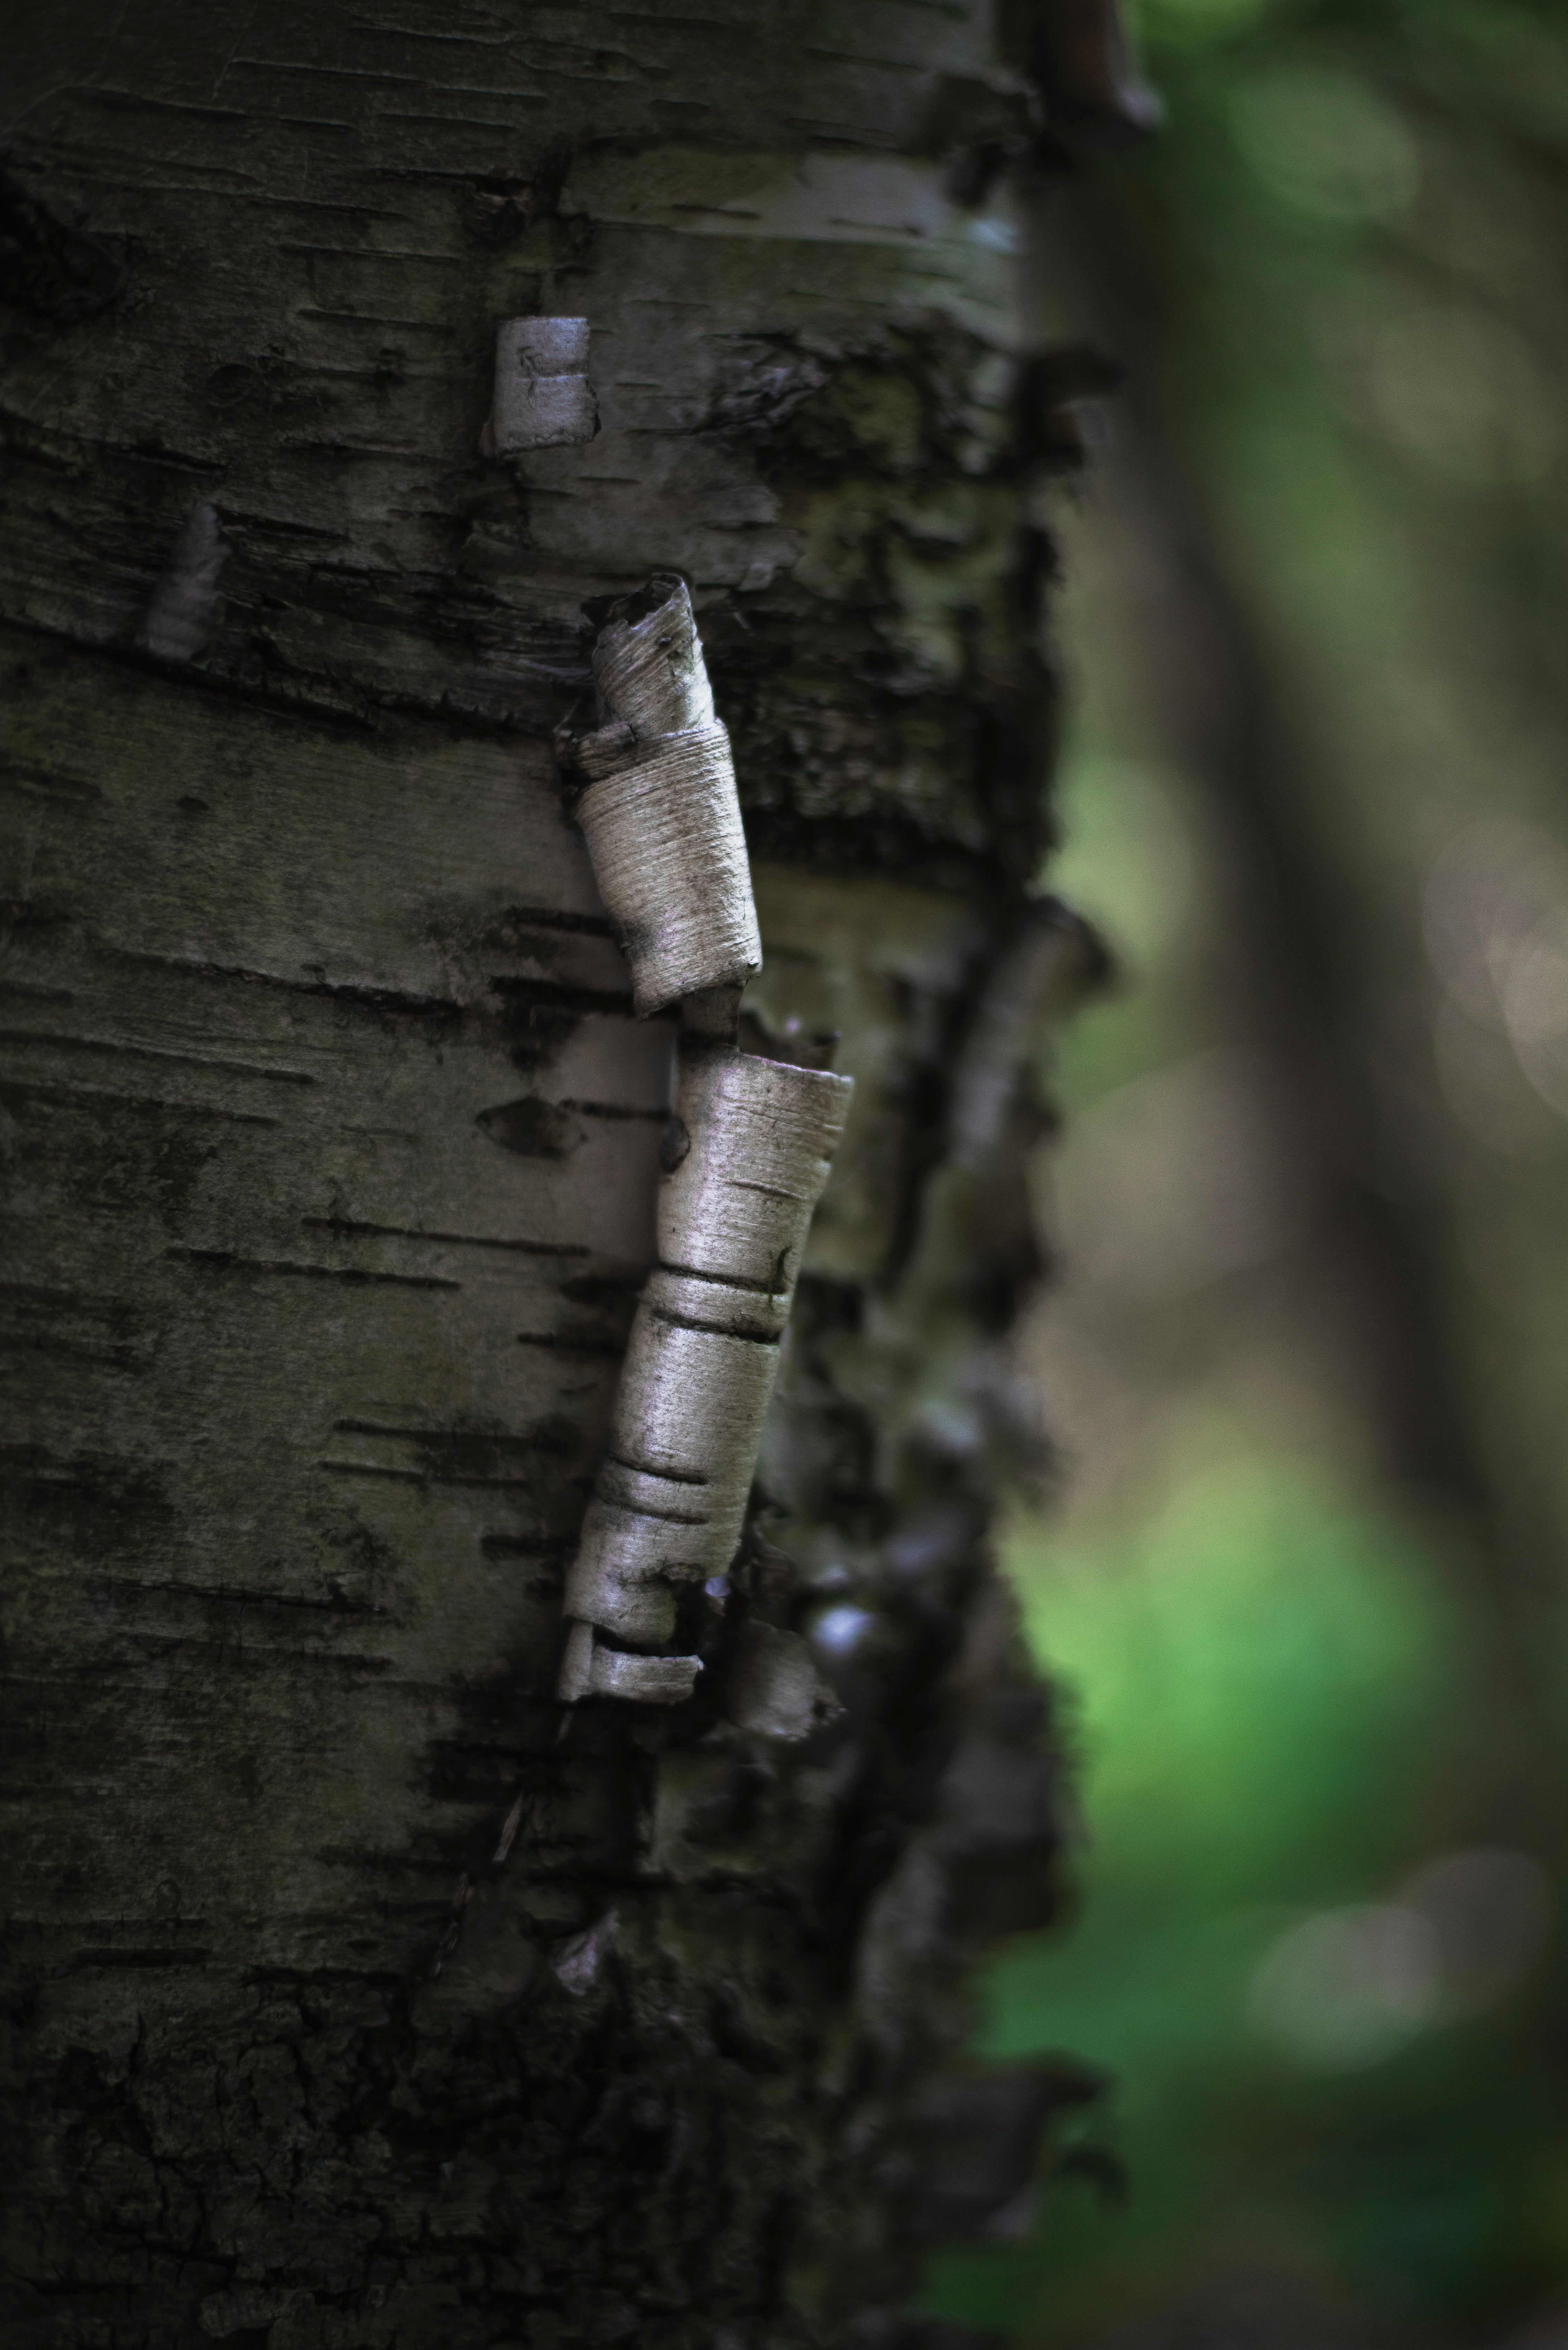 Bark of a birch tree peeling off - a Royalty Free Stock Photo from Photocase